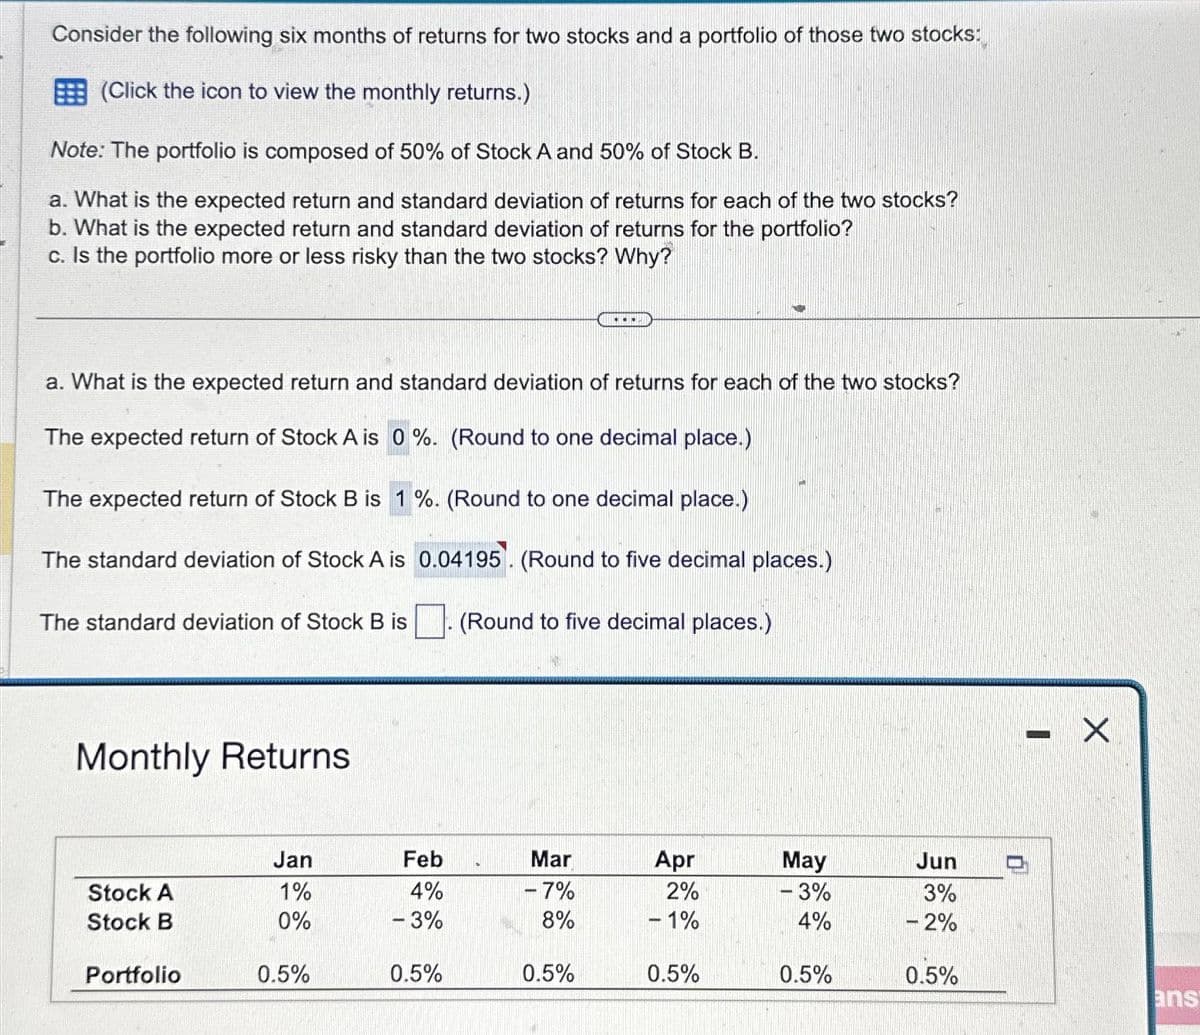 Consider the following six months of returns for two stocks and a portfolio of those two stocks:
(Click the icon to view the monthly returns.)
Note: The portfolio is composed of 50% of Stock A and 50% of Stock B.
a. What is the expected return and standard deviation of returns for each of the two stocks?
b. What is the expected return and standard deviation of returns for the portfolio?
c. Is the portfolio more or less risky than the two stocks? Why?
a. What is the expected return and standard deviation of returns for each of the two stocks?
The expected return of Stock A is 0%. (Round to one decimal place.)
The expected return of Stock B is 1%. (Round to one decimal place.)
The standard deviation of Stock A is 0.04195. (Round to five decimal places.)
(Round to five decimal places.)
The standard deviation of Stock B is
Monthly Returns
Stock A
Stock B
Portfolio
Jan
1%
0%
0.5%
Feb
4%
- 3%
0.5%
D
Mar
-7%
8%
.....
0.5%
Apr
2%
- 1%
0.5%
May
- 3%
4%
0.5%
Jun
3%
- 2%
0.5%
WOCHE
X
ans